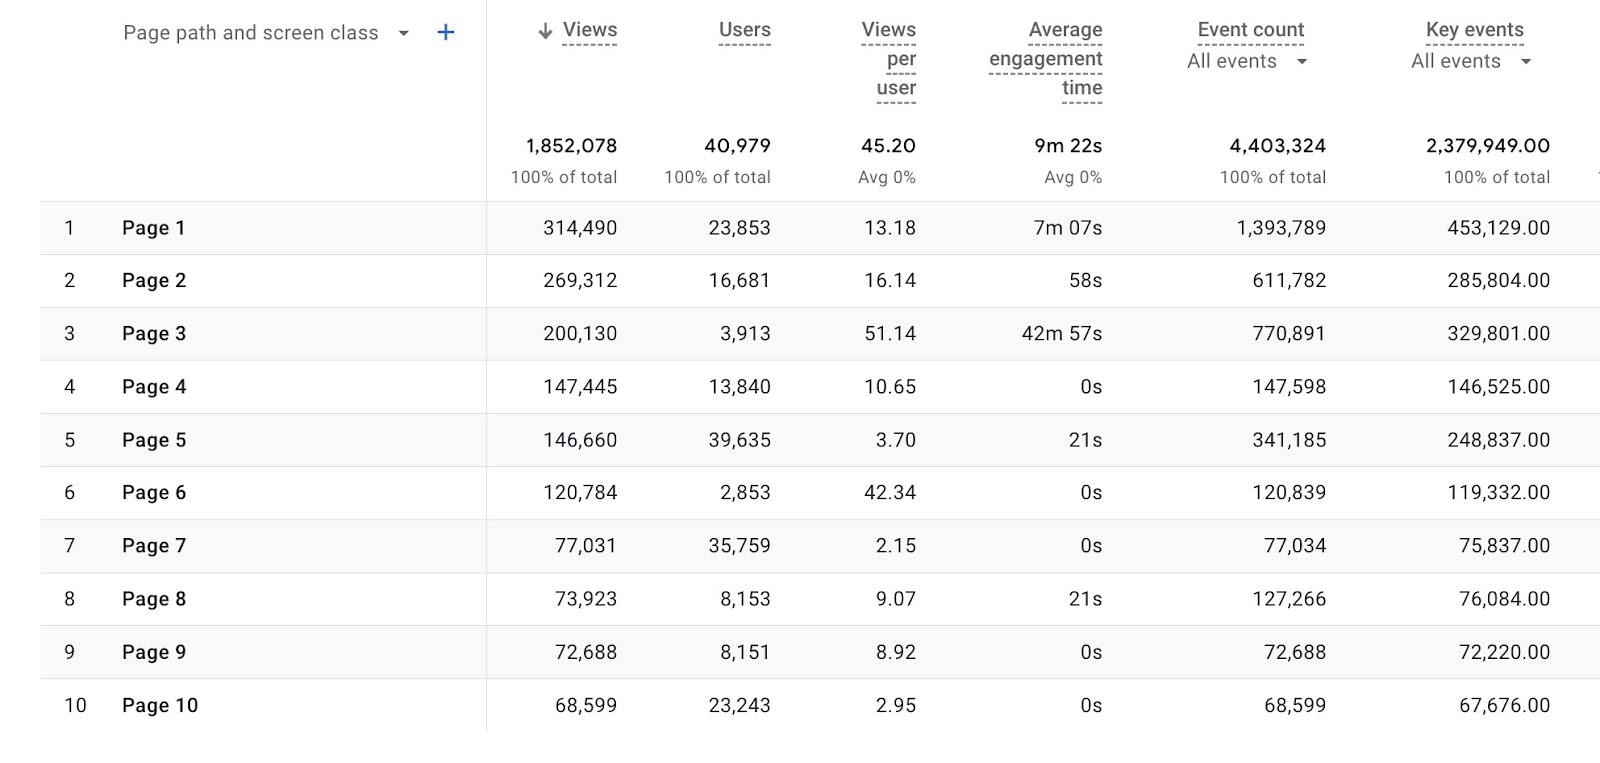 "Page path and screen class" report on Google Analytics showing views, users, engagement time etc. for each page.